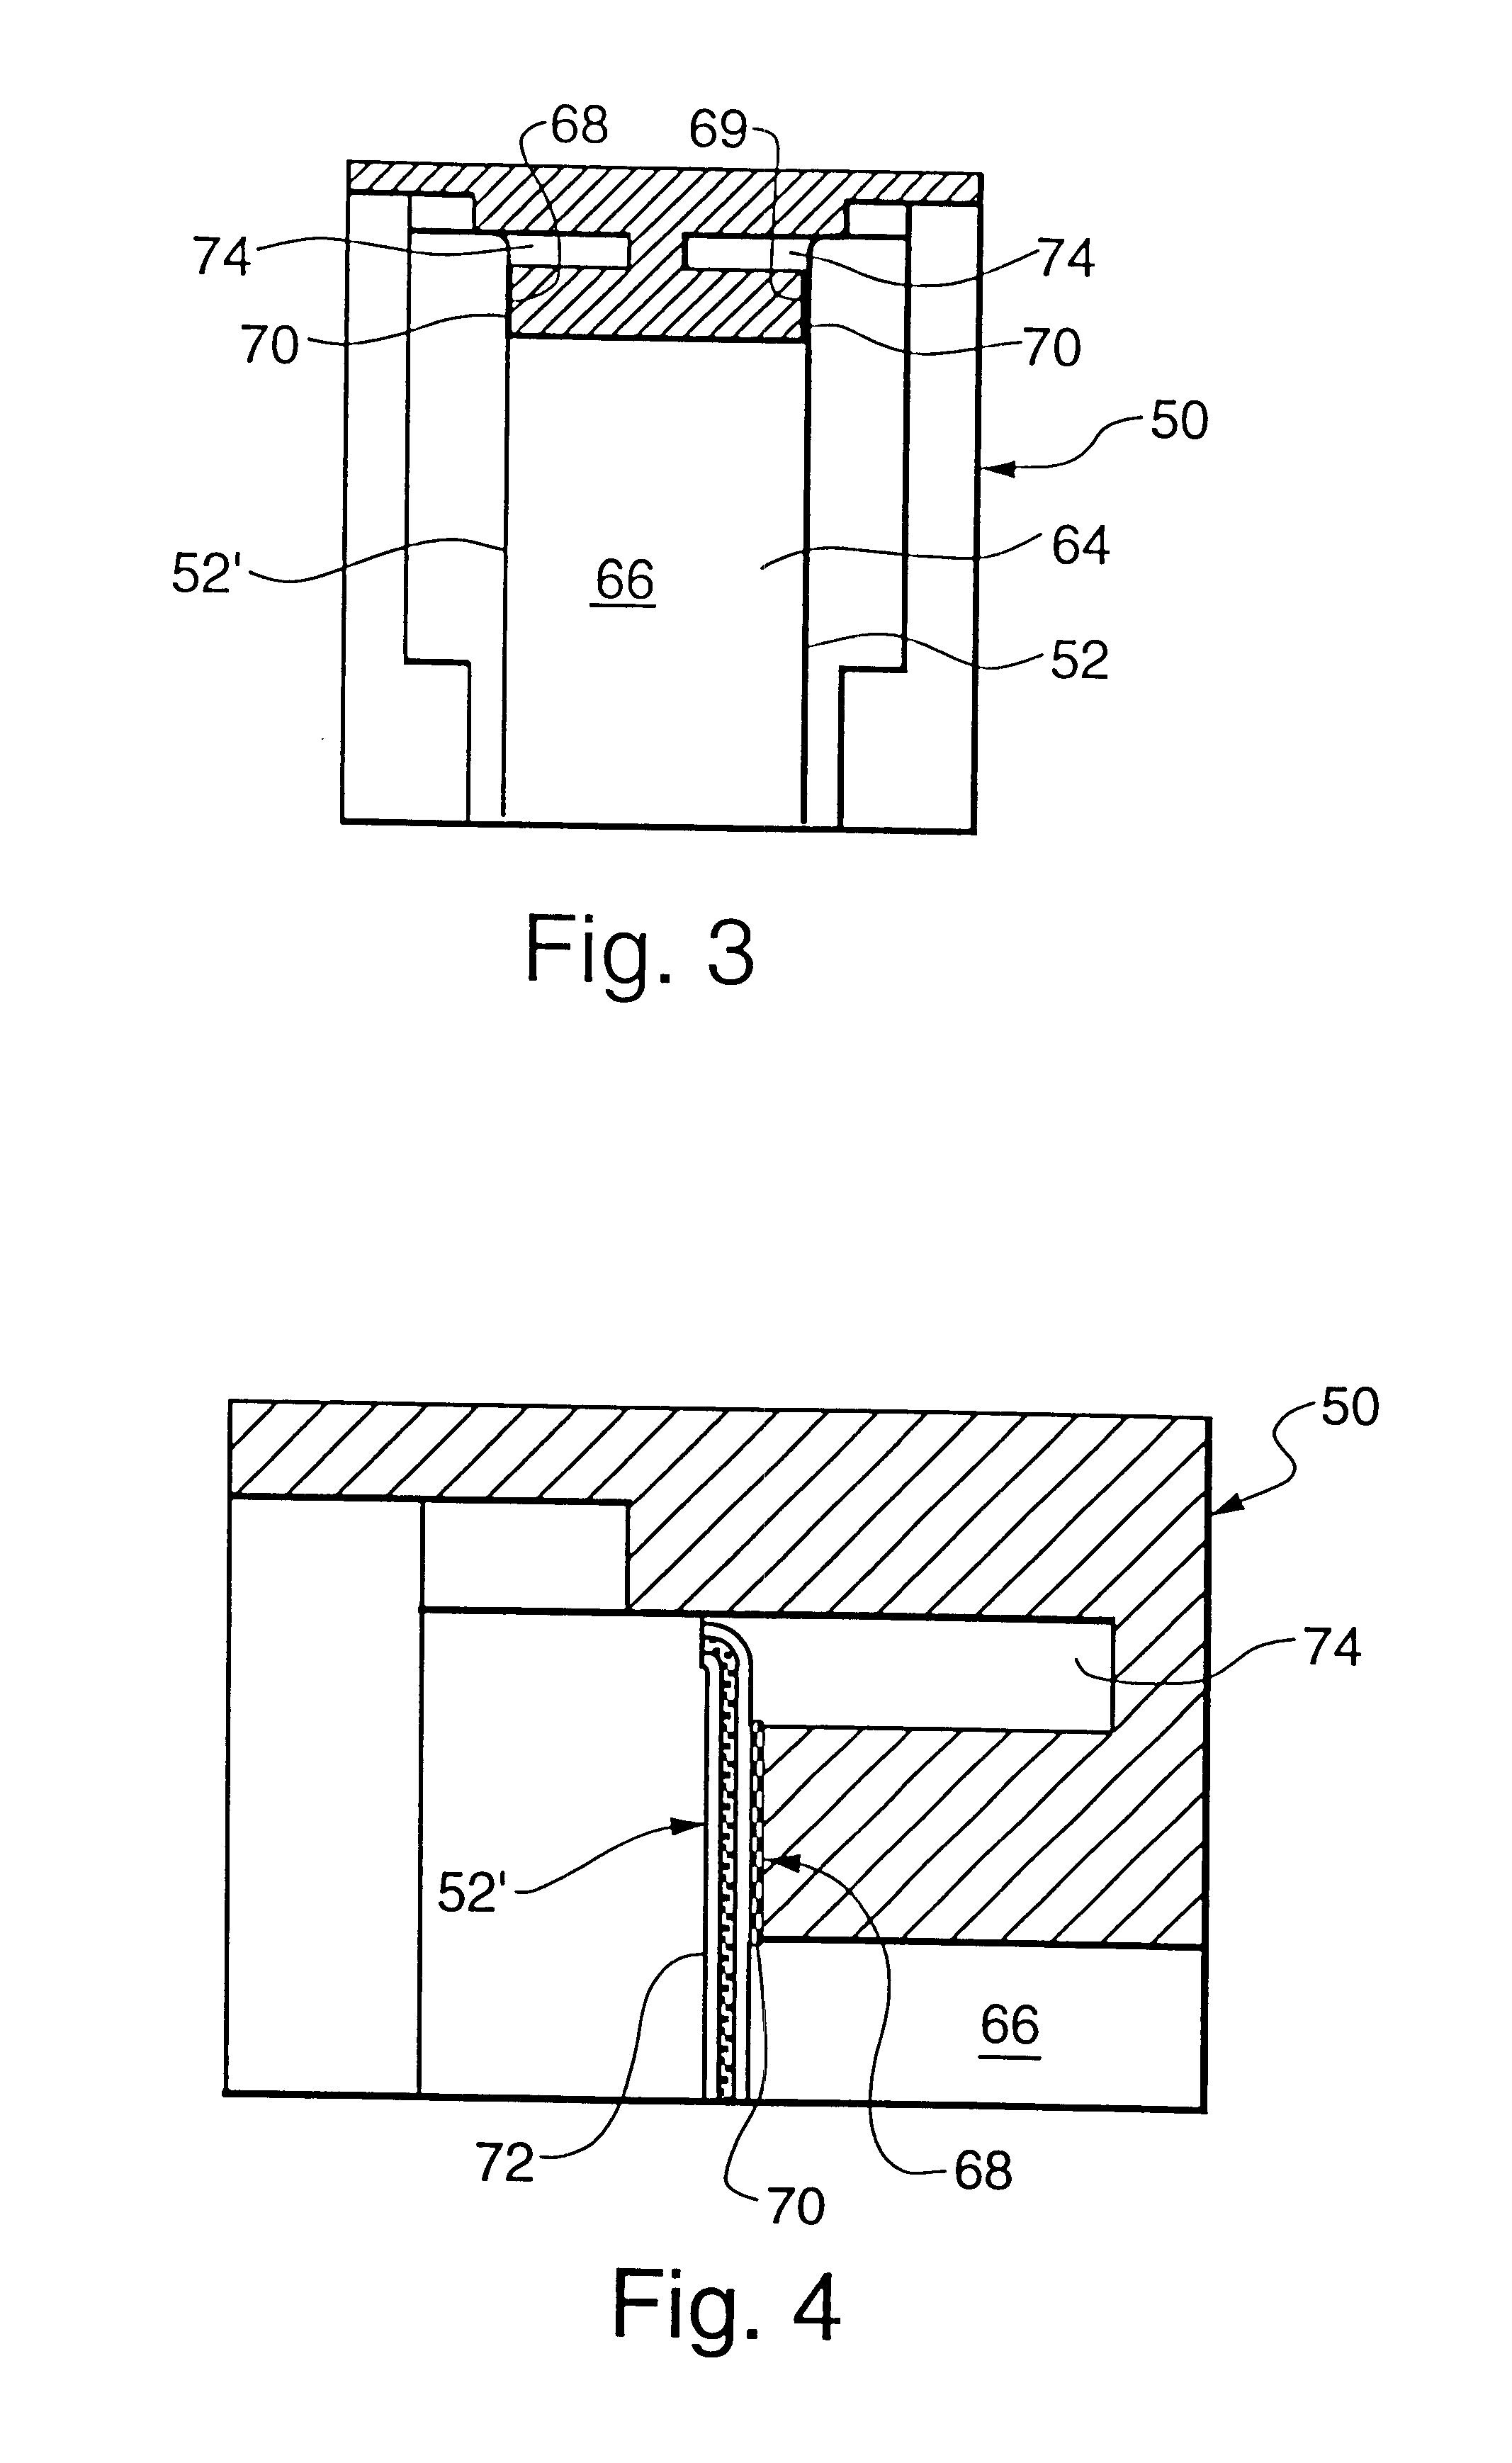 Print head cartridge made with jointless one-piece frame consisting of a single material throughout